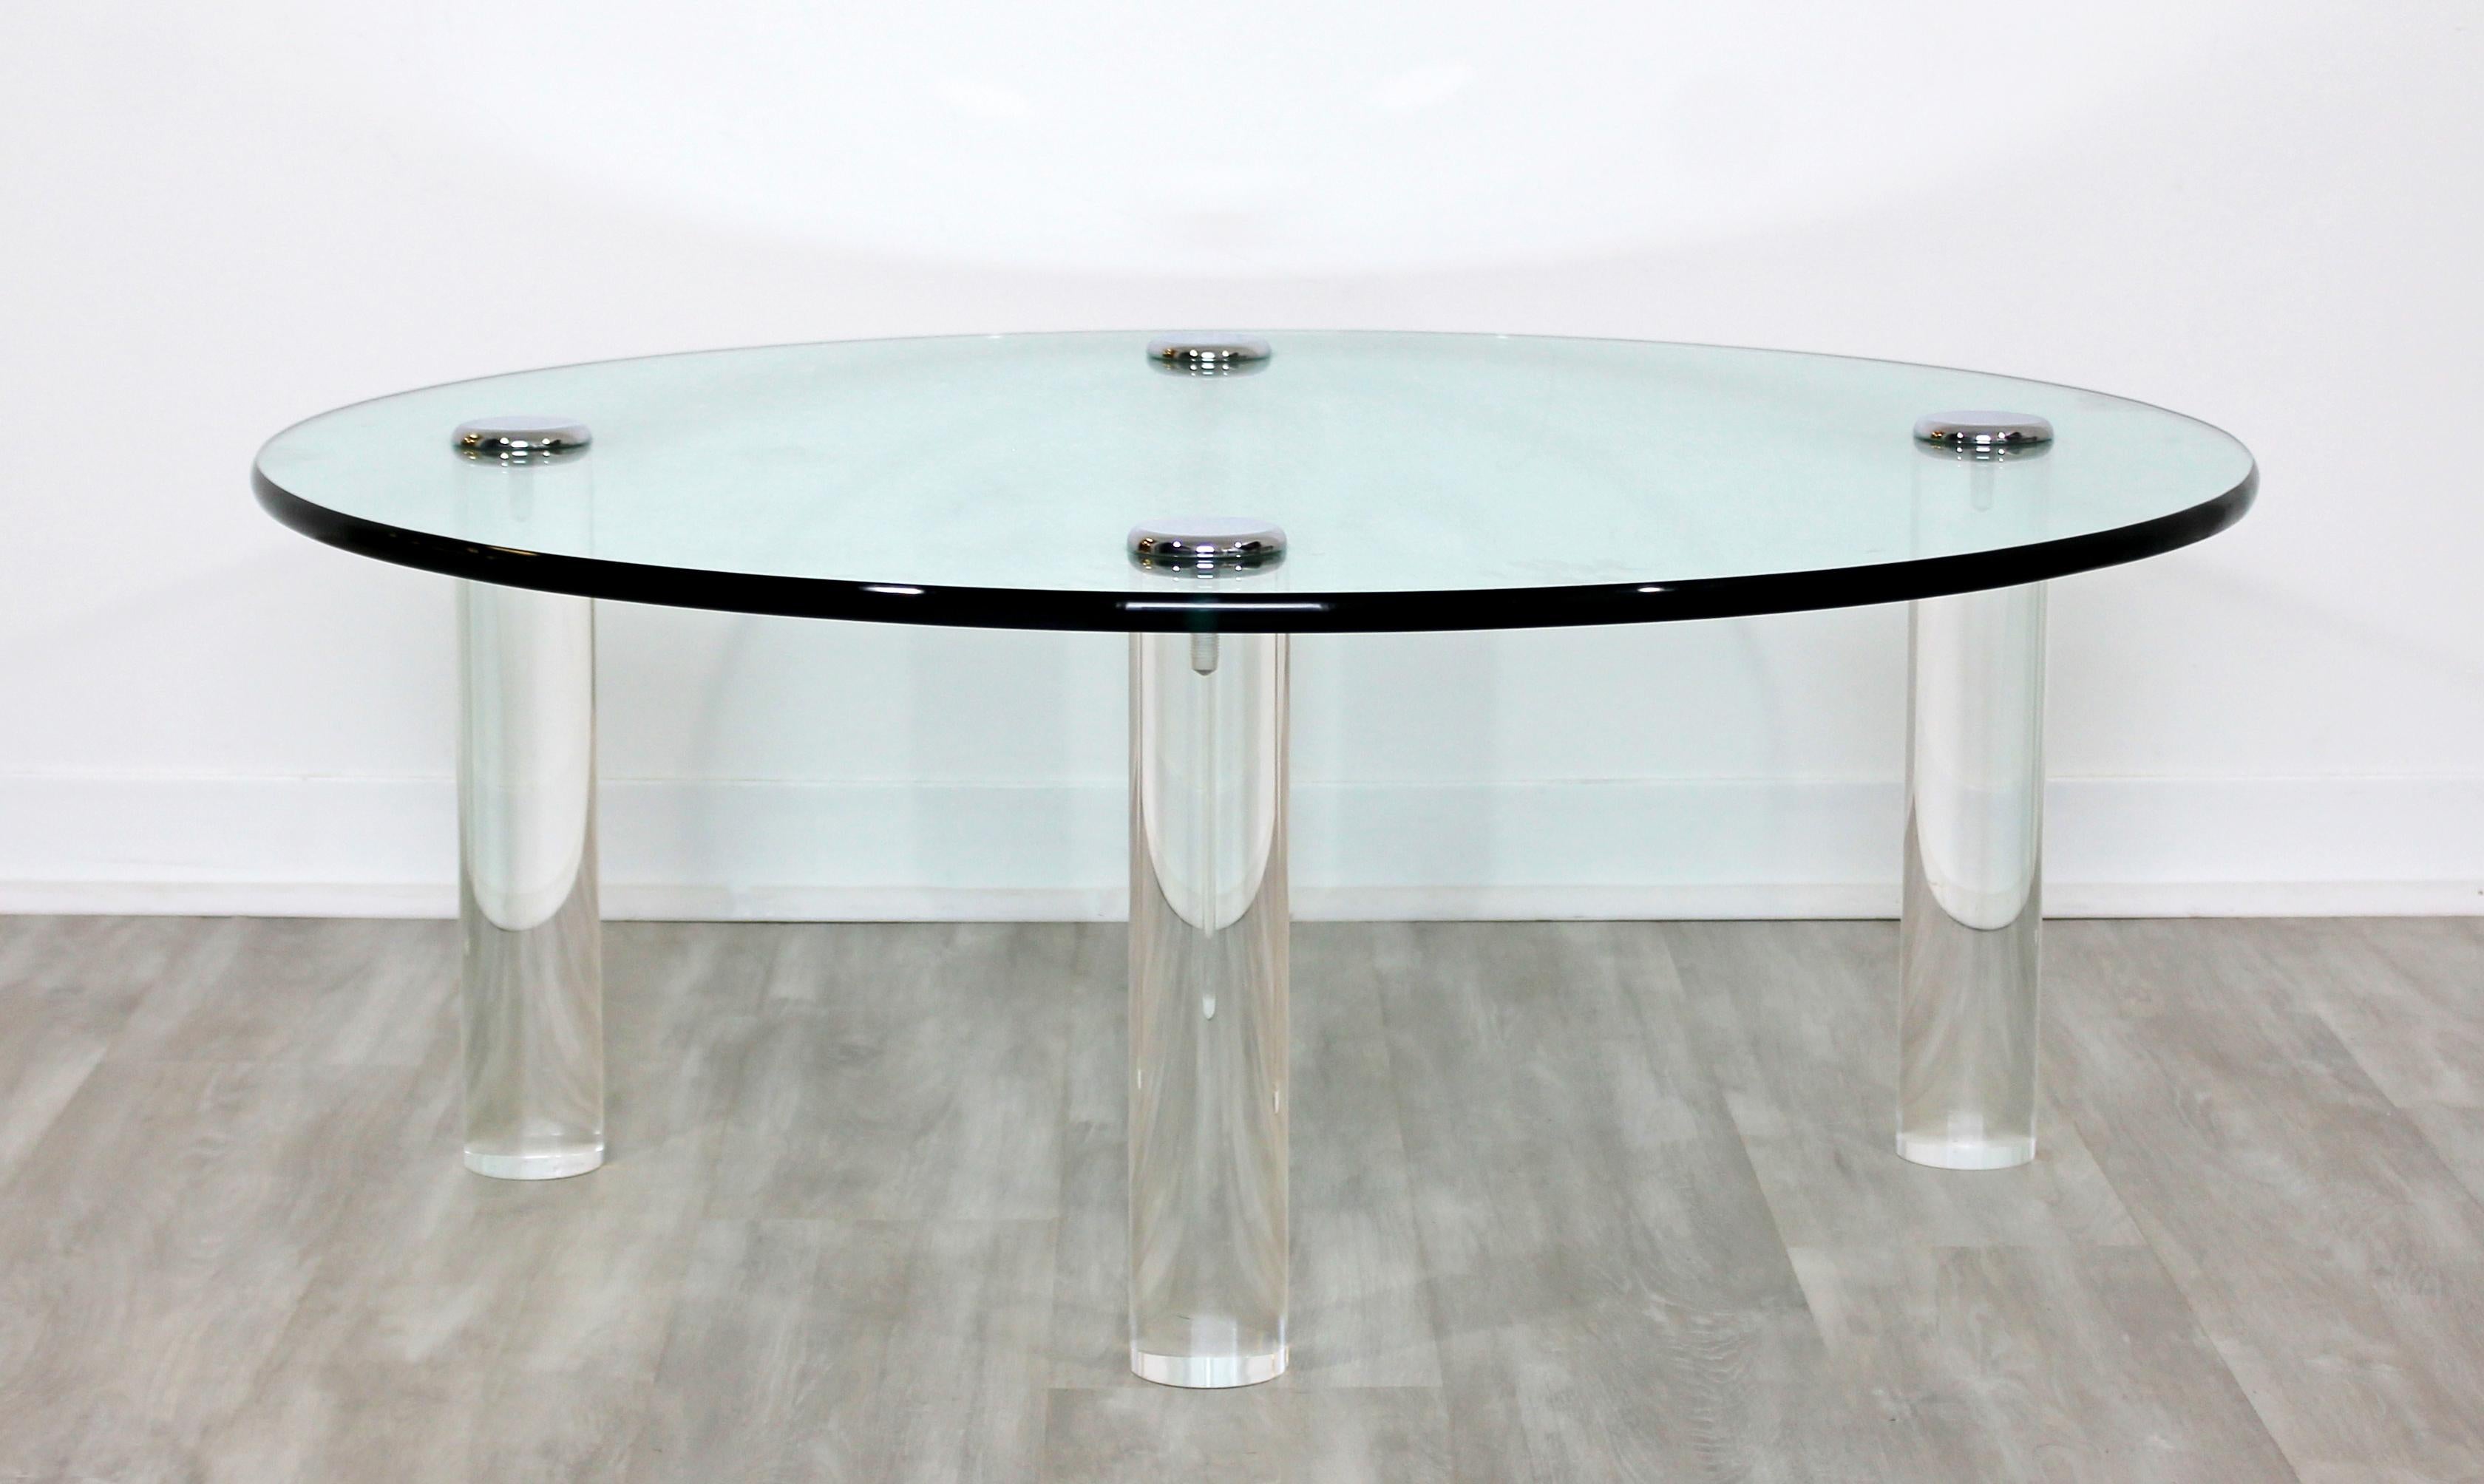 American Mid-Century Modern Pace Collection Glass Chrome Lucite Round Coffee Table 1970s